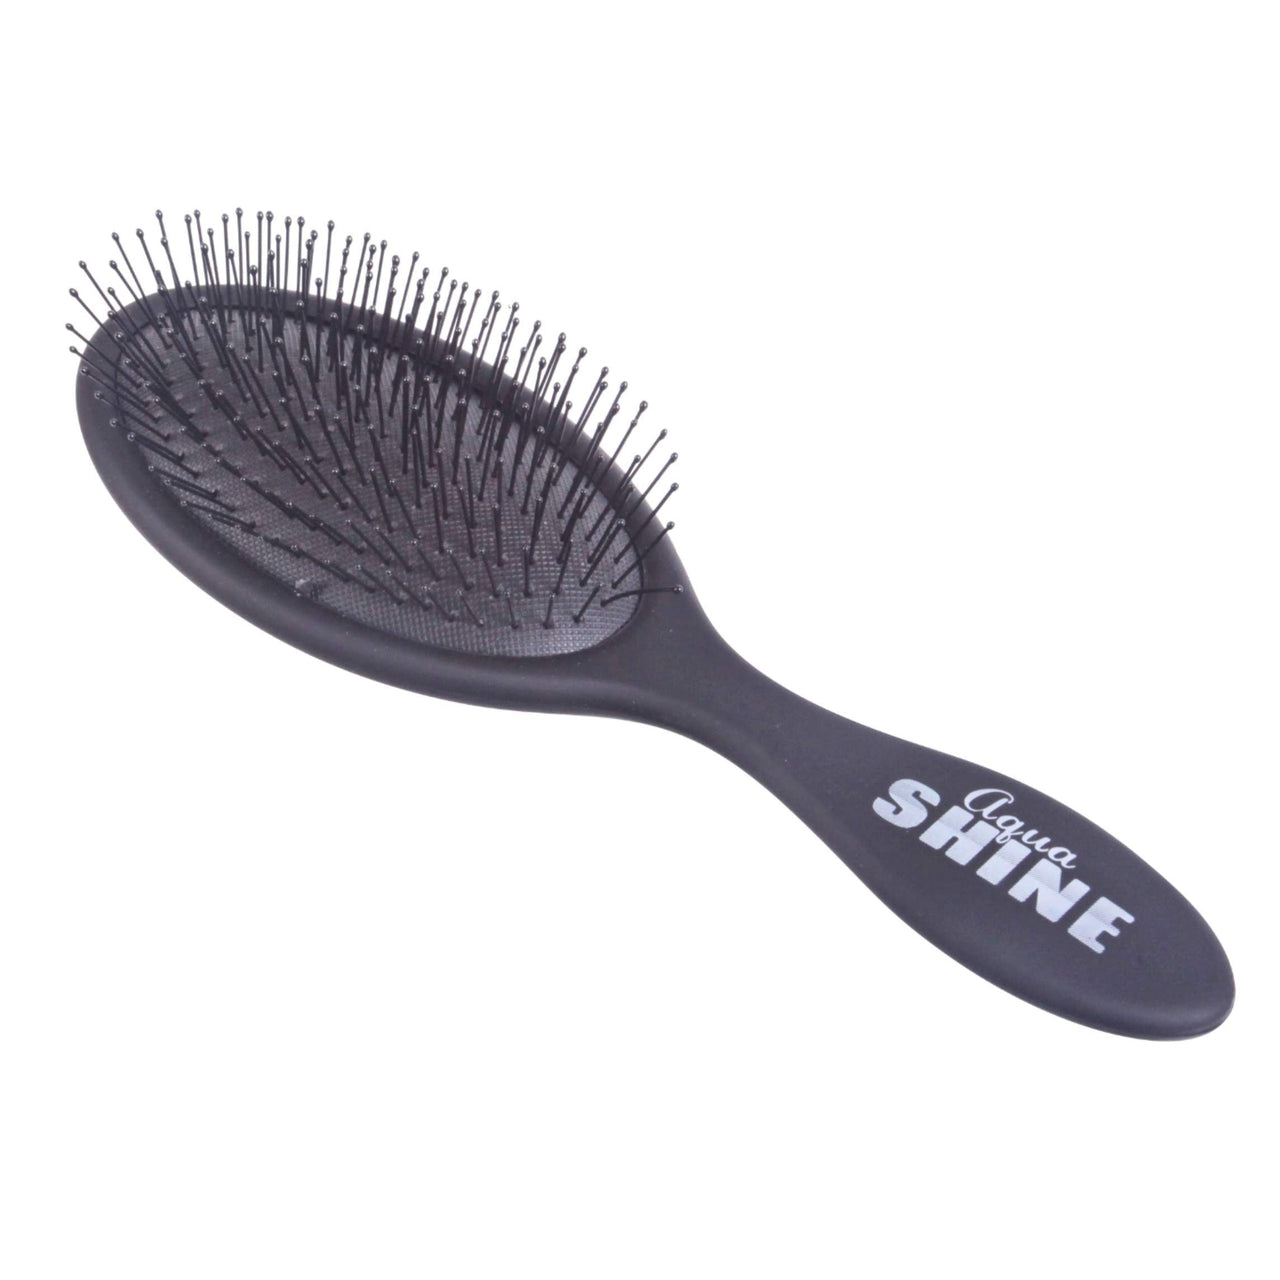 Wet Dry Brush Soft Flexible Bristles Detangles and Smooths with Ease - Black